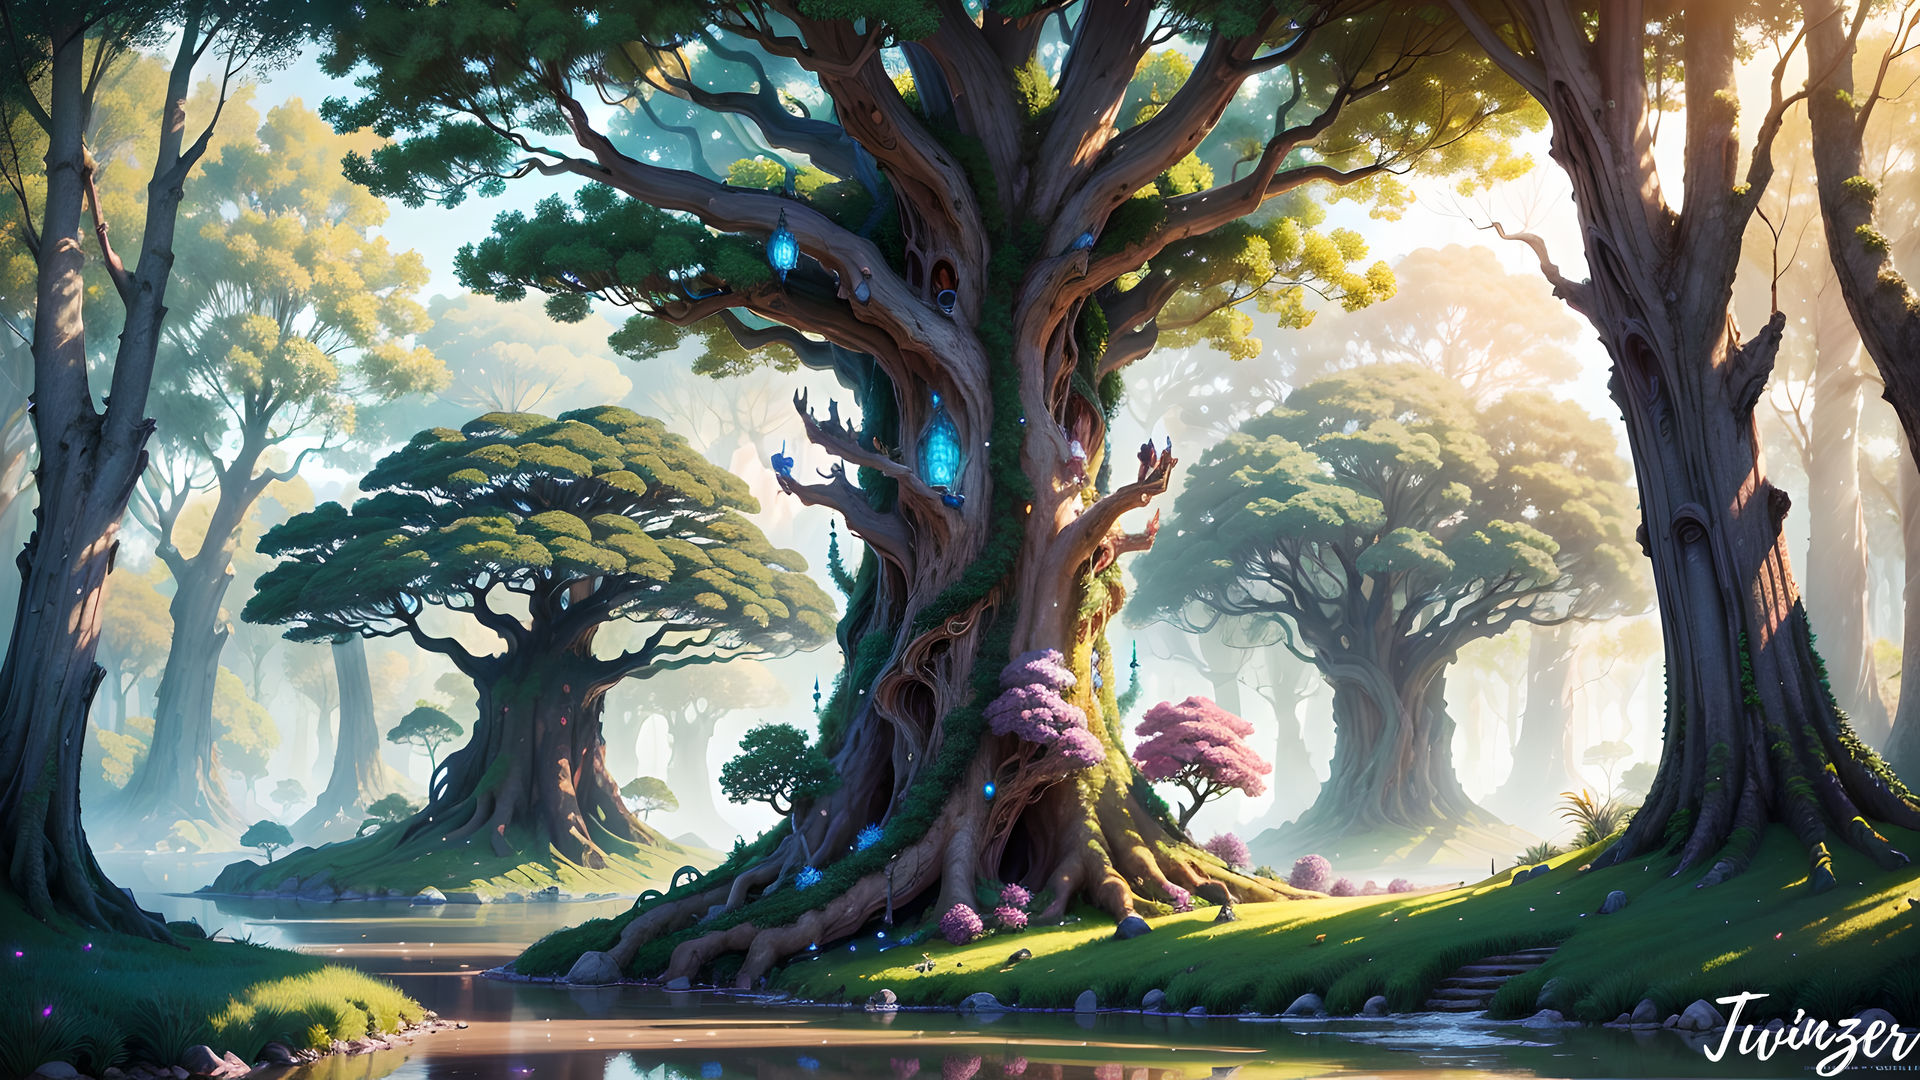 Whispering Tree 4K [ANIMATED FREE ON STEAM] by Tw1nzer on DeviantArt